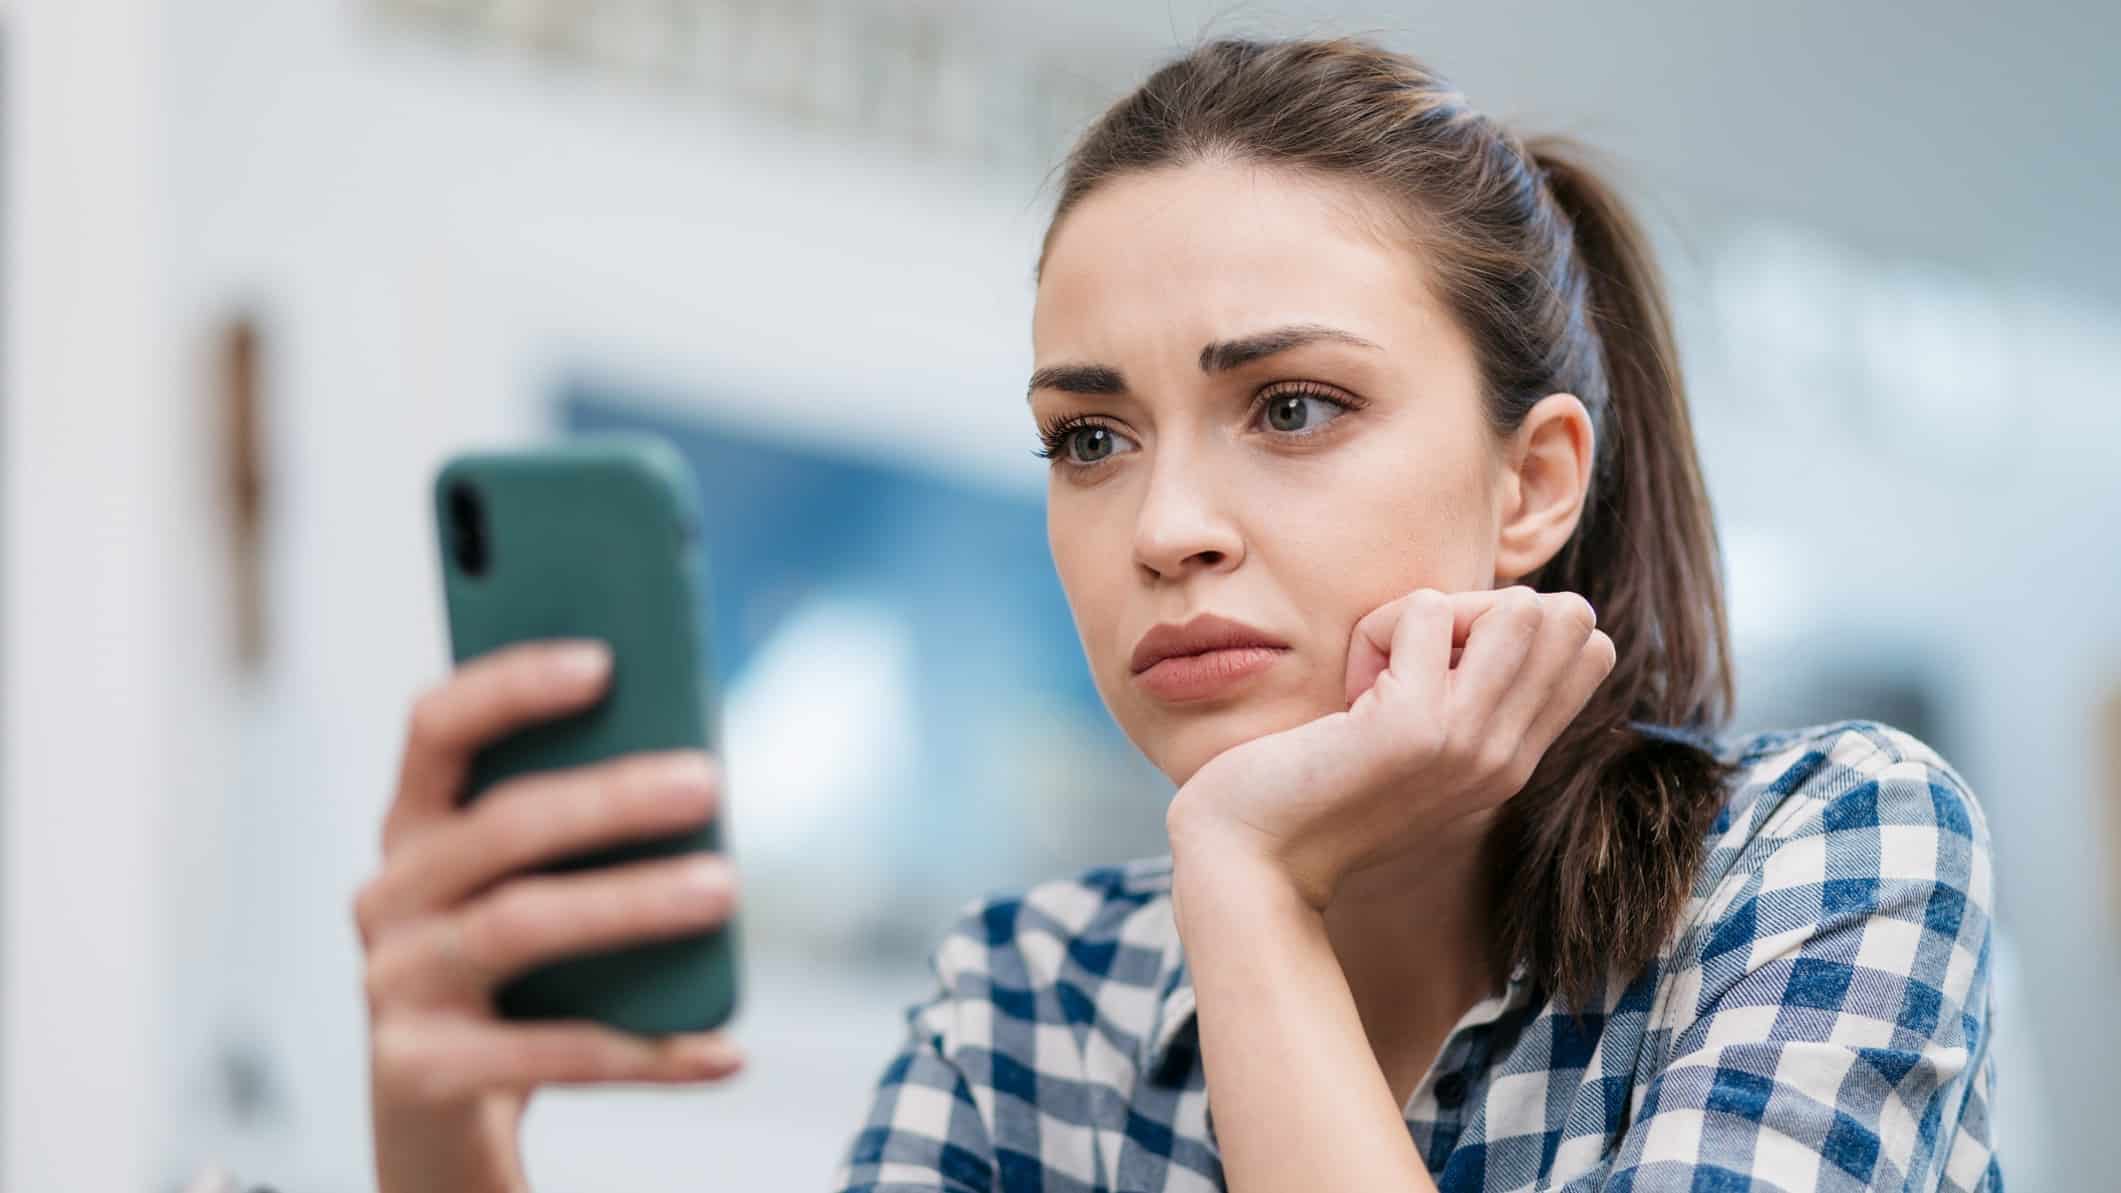 Close up of a sad young woman reading about declining share price on her phone.